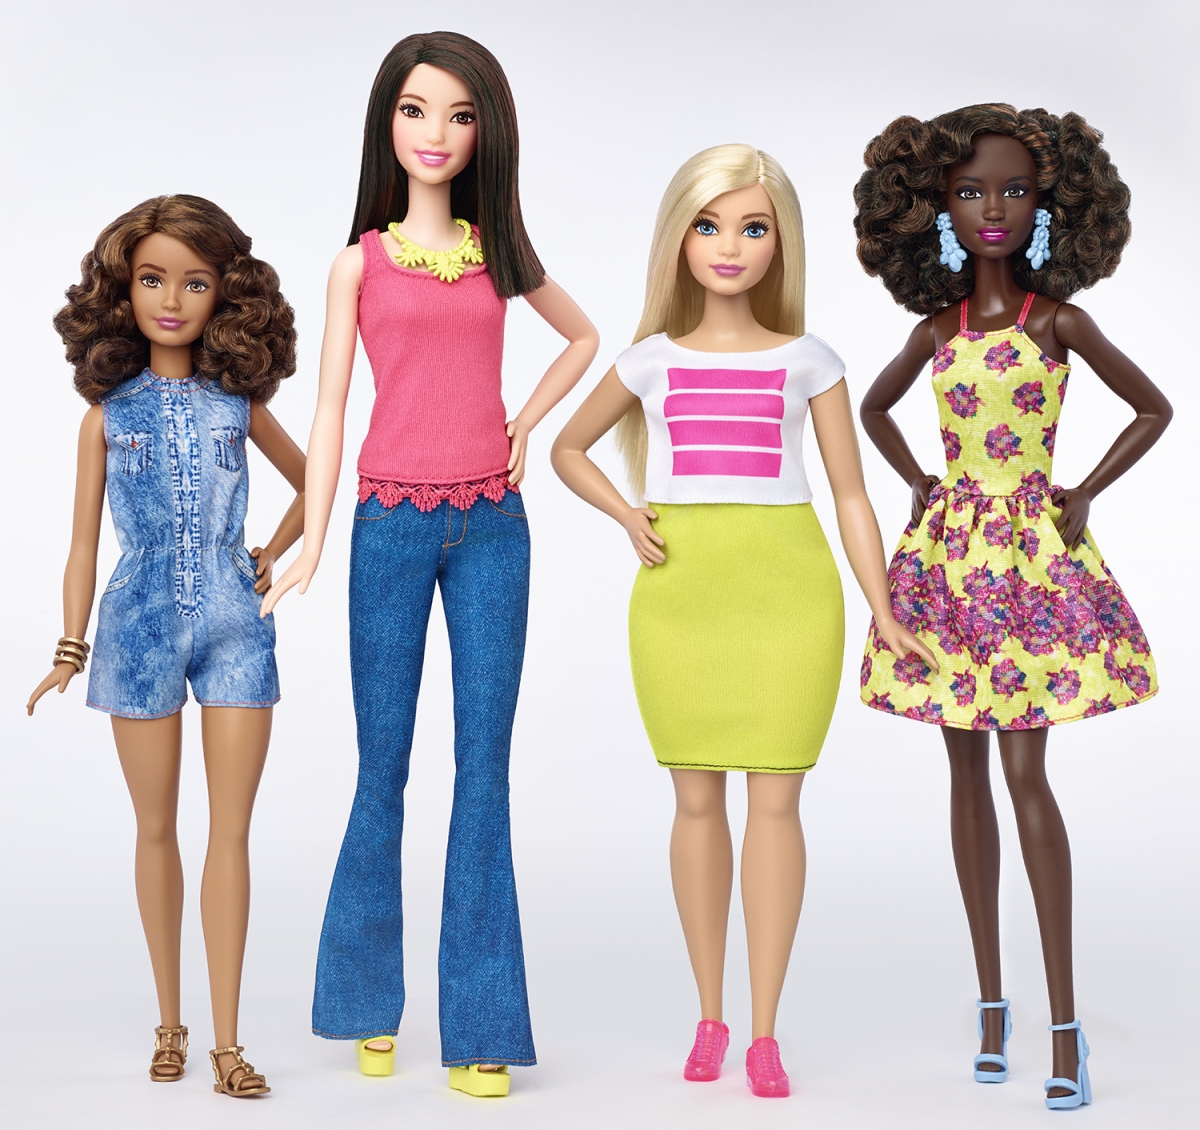 Barbie The Doll Evolves As Mattel Launches Figure With Different Skin Tones And Body Types